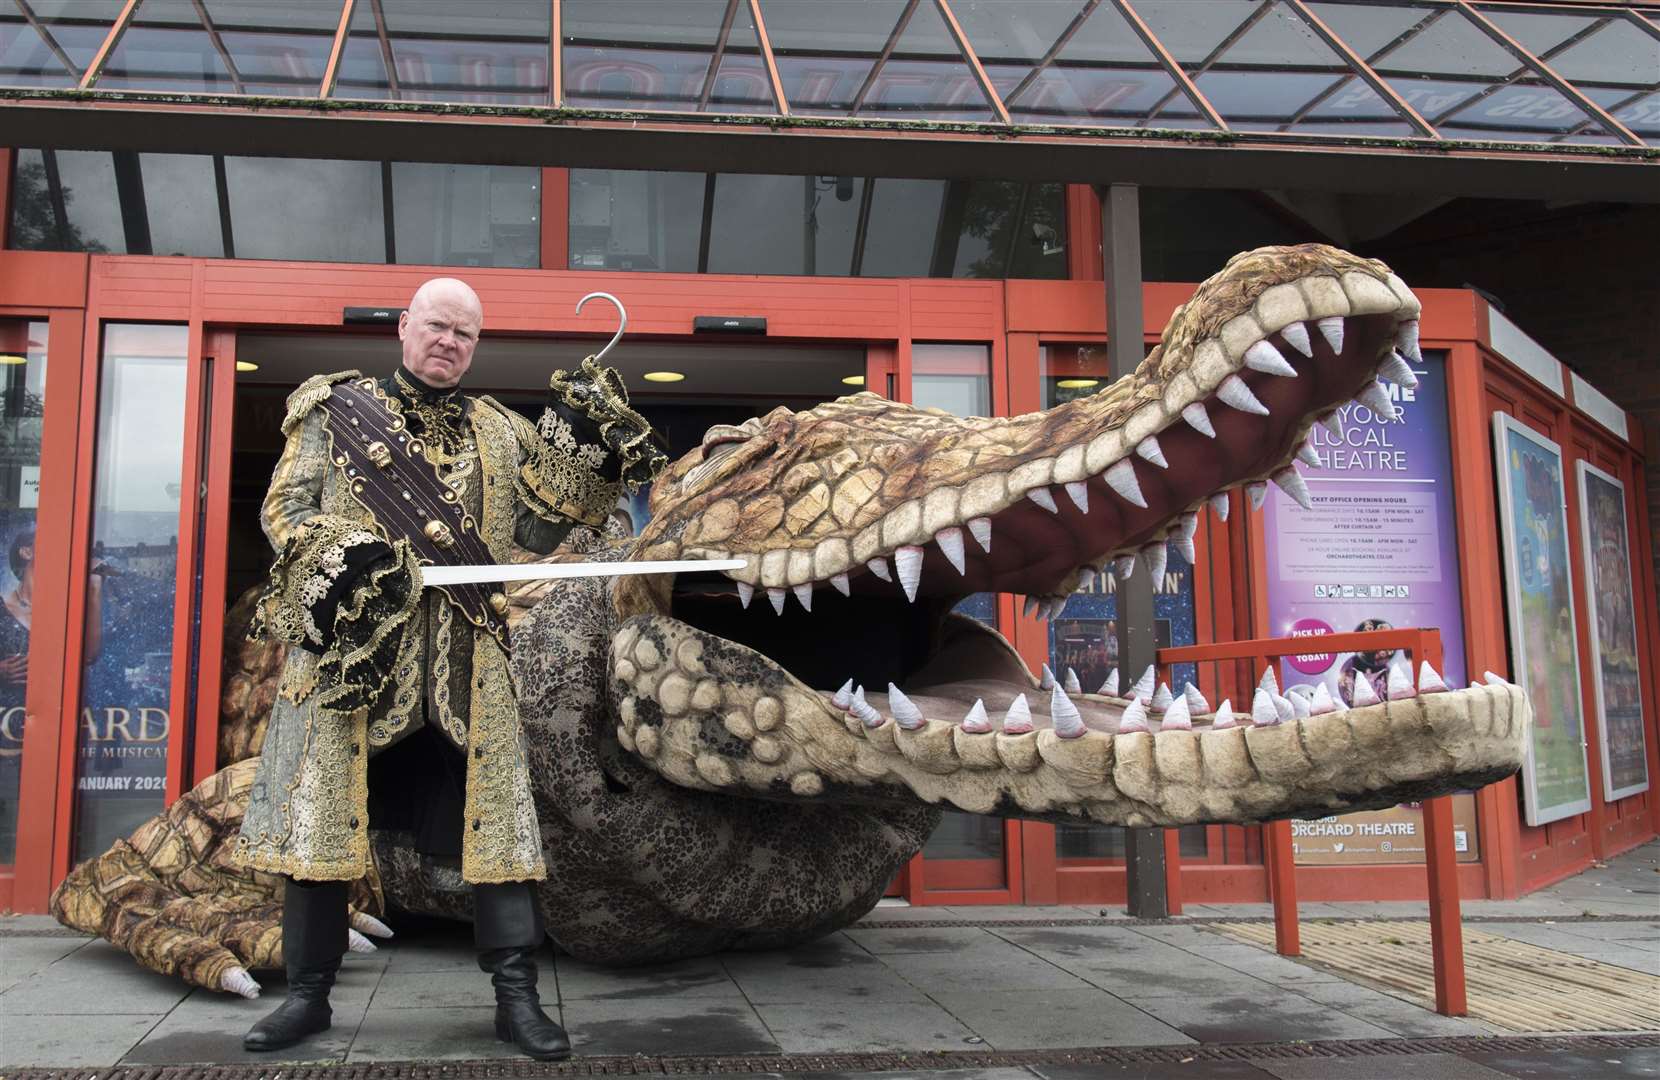 Captain Hook (Steve McFadden) meets the crocodile at the Orchard Theatre